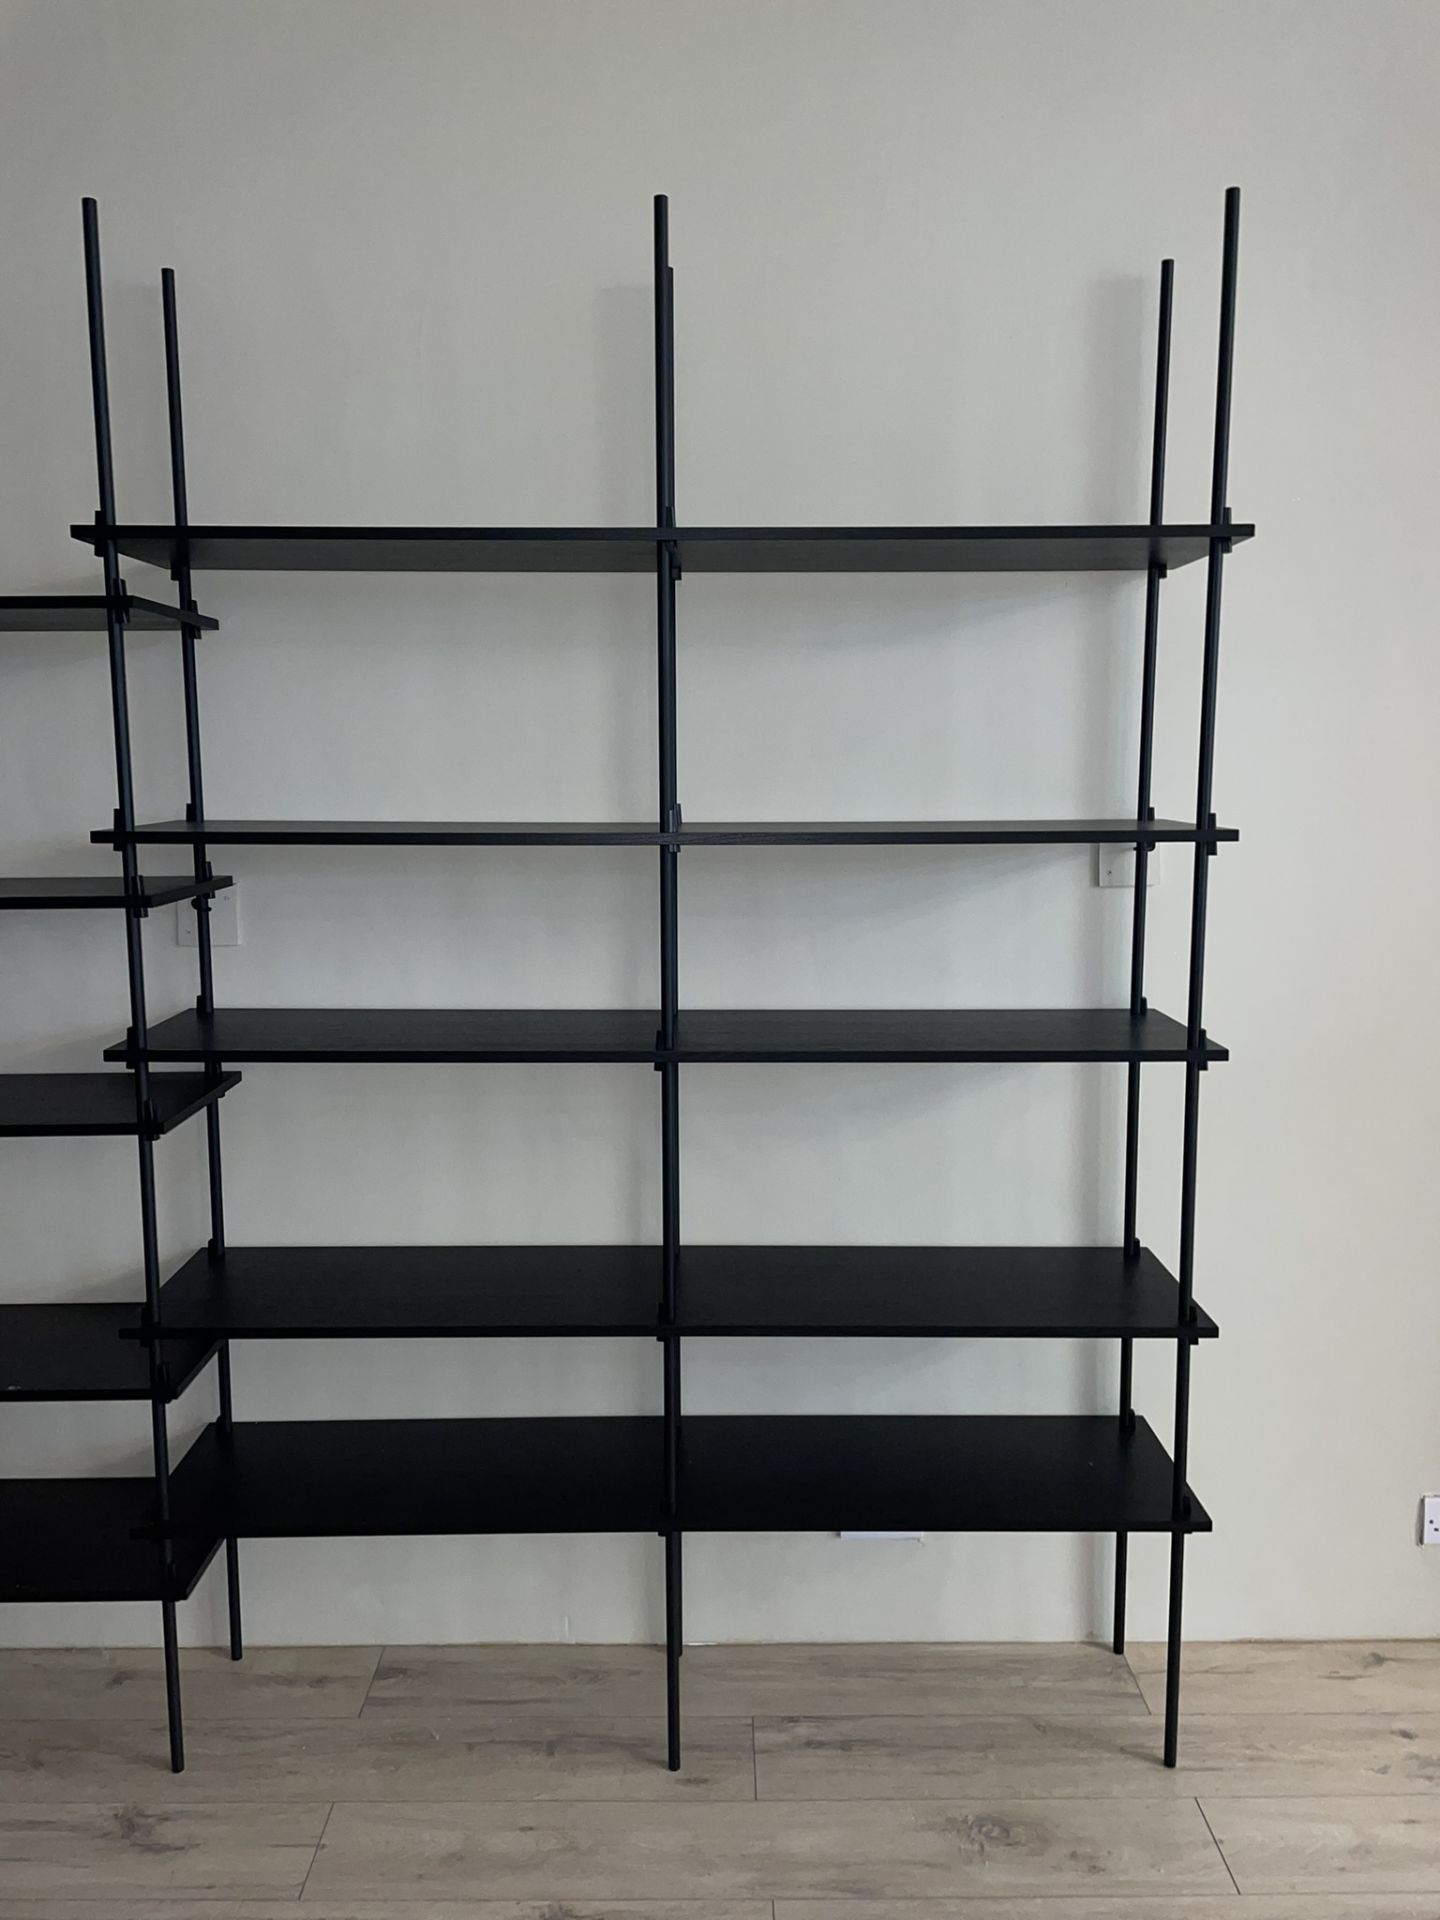 2 x 25 Tier Adjustable Shelving Units in Brown & Black | Dismantled for transit | CONTENTS NOT INCLU - Image 6 of 11